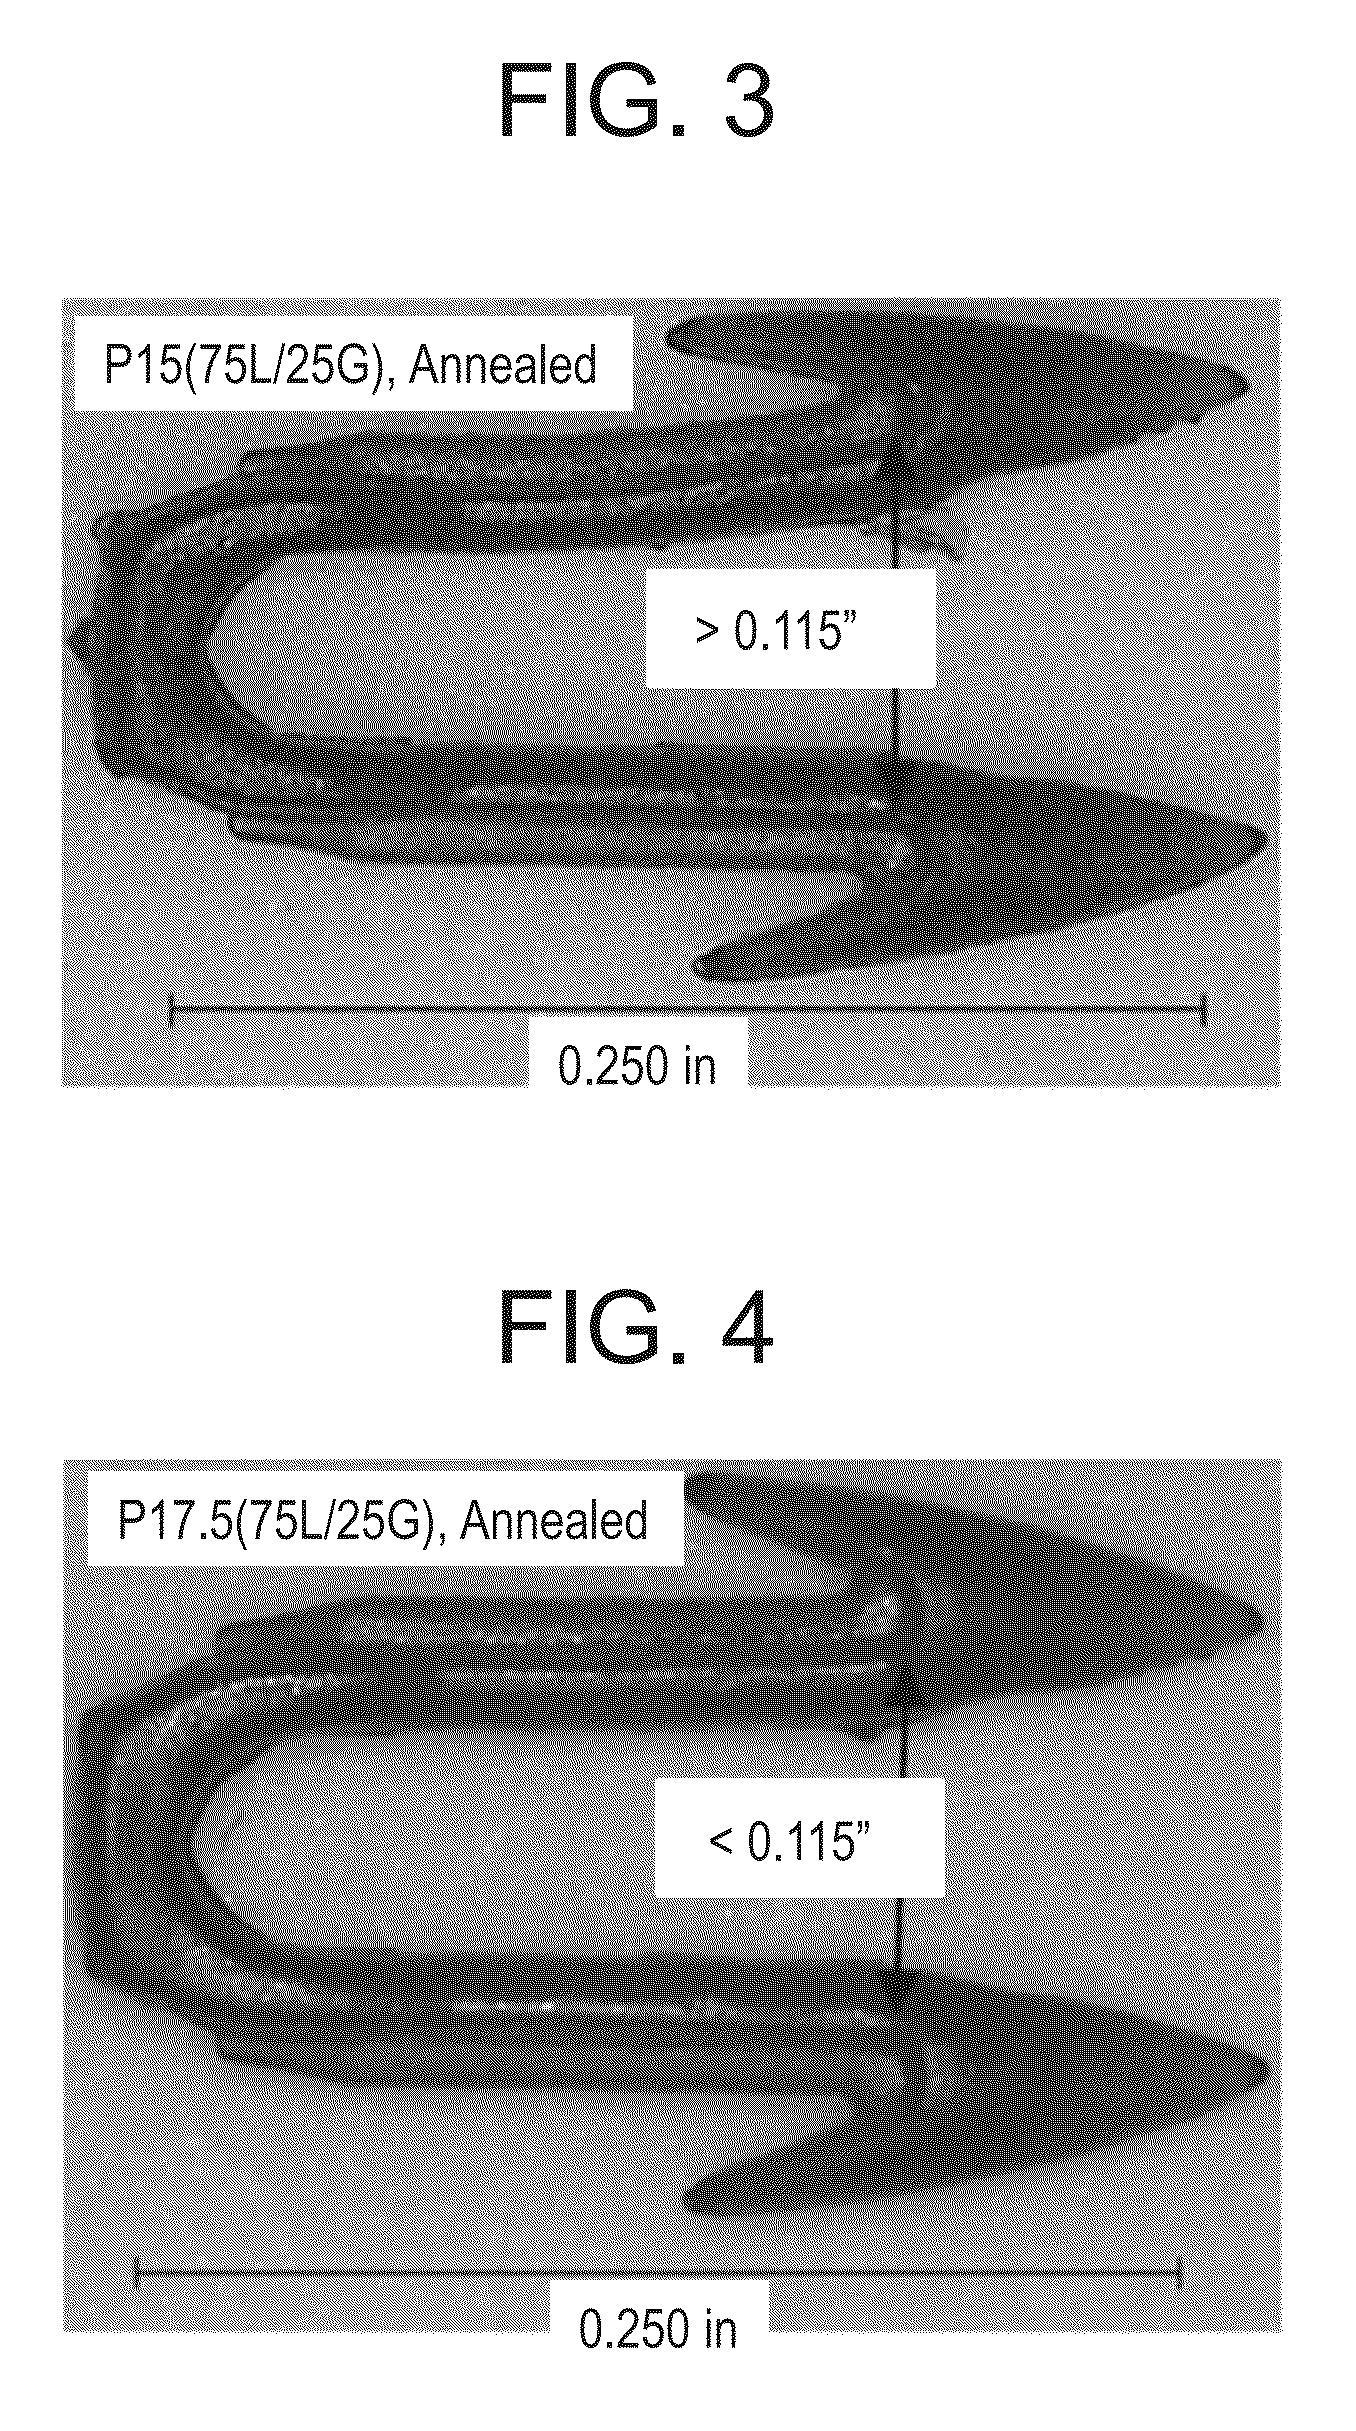 Absorbable polymeric blend compositions based on copolymers prepared from mono- and di-functional polymerization initiators, processing methods, and medical devices therefrom